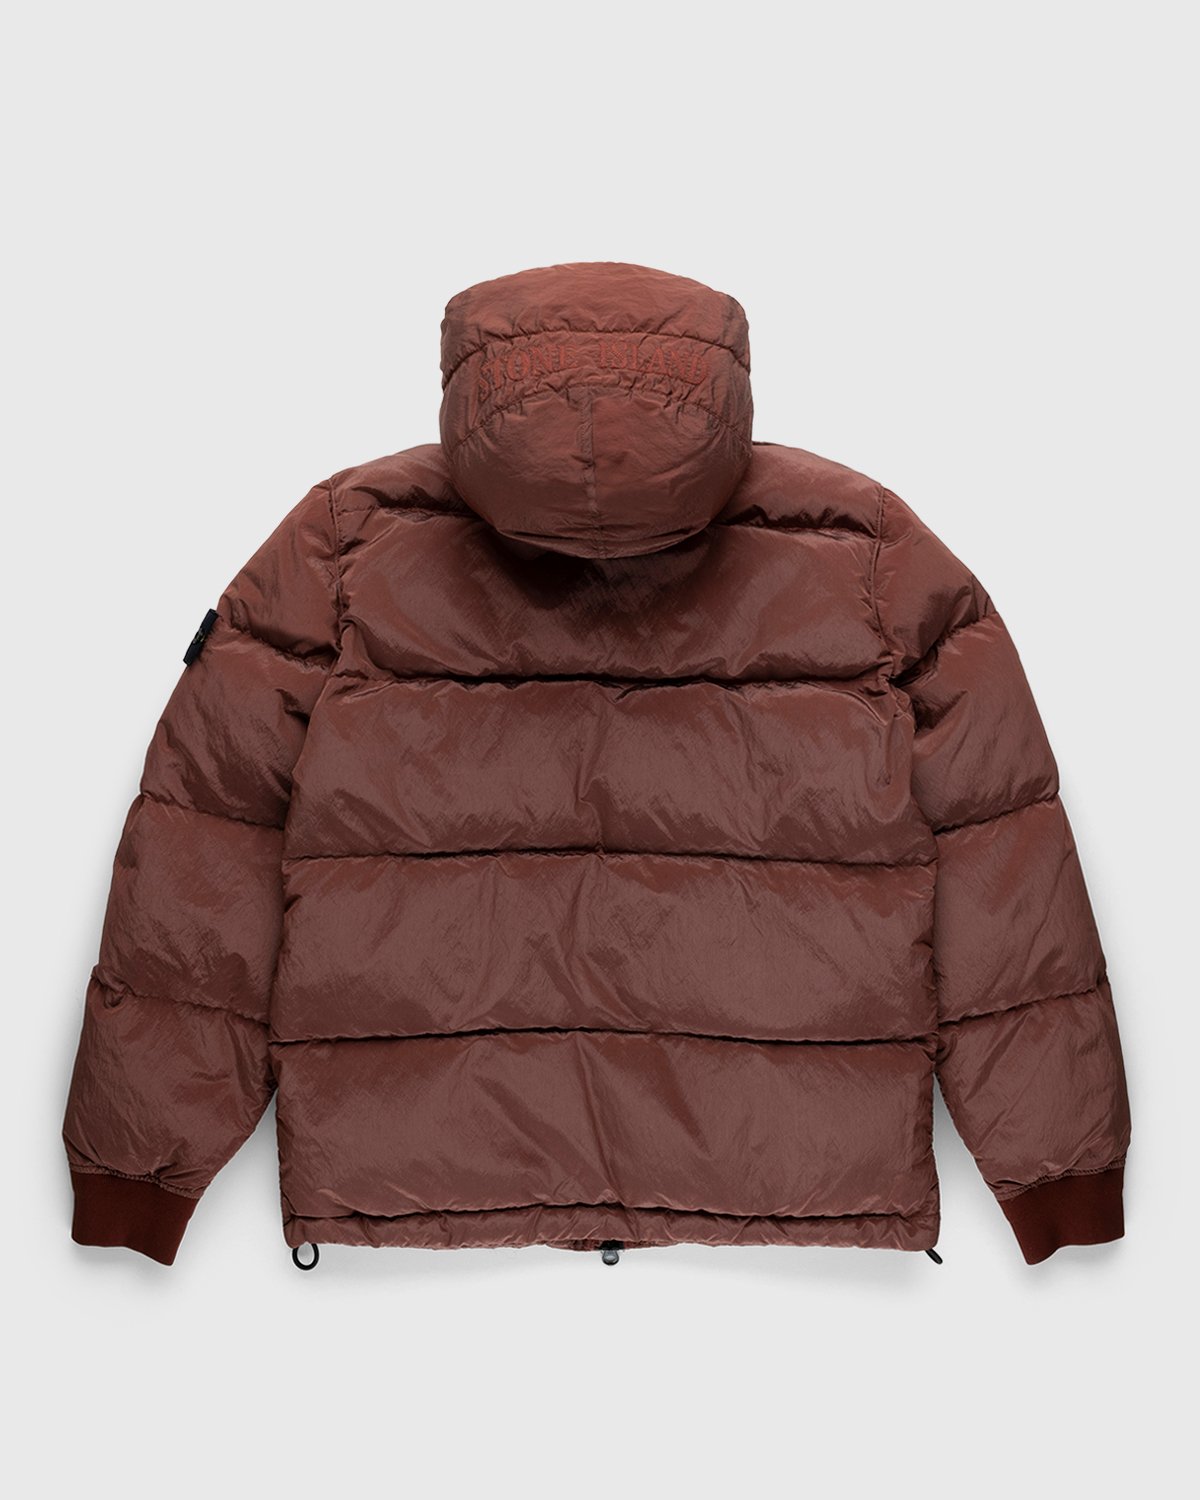 Stone Island - Real Down Jacket Brick Red - Clothing - Red - Image 2